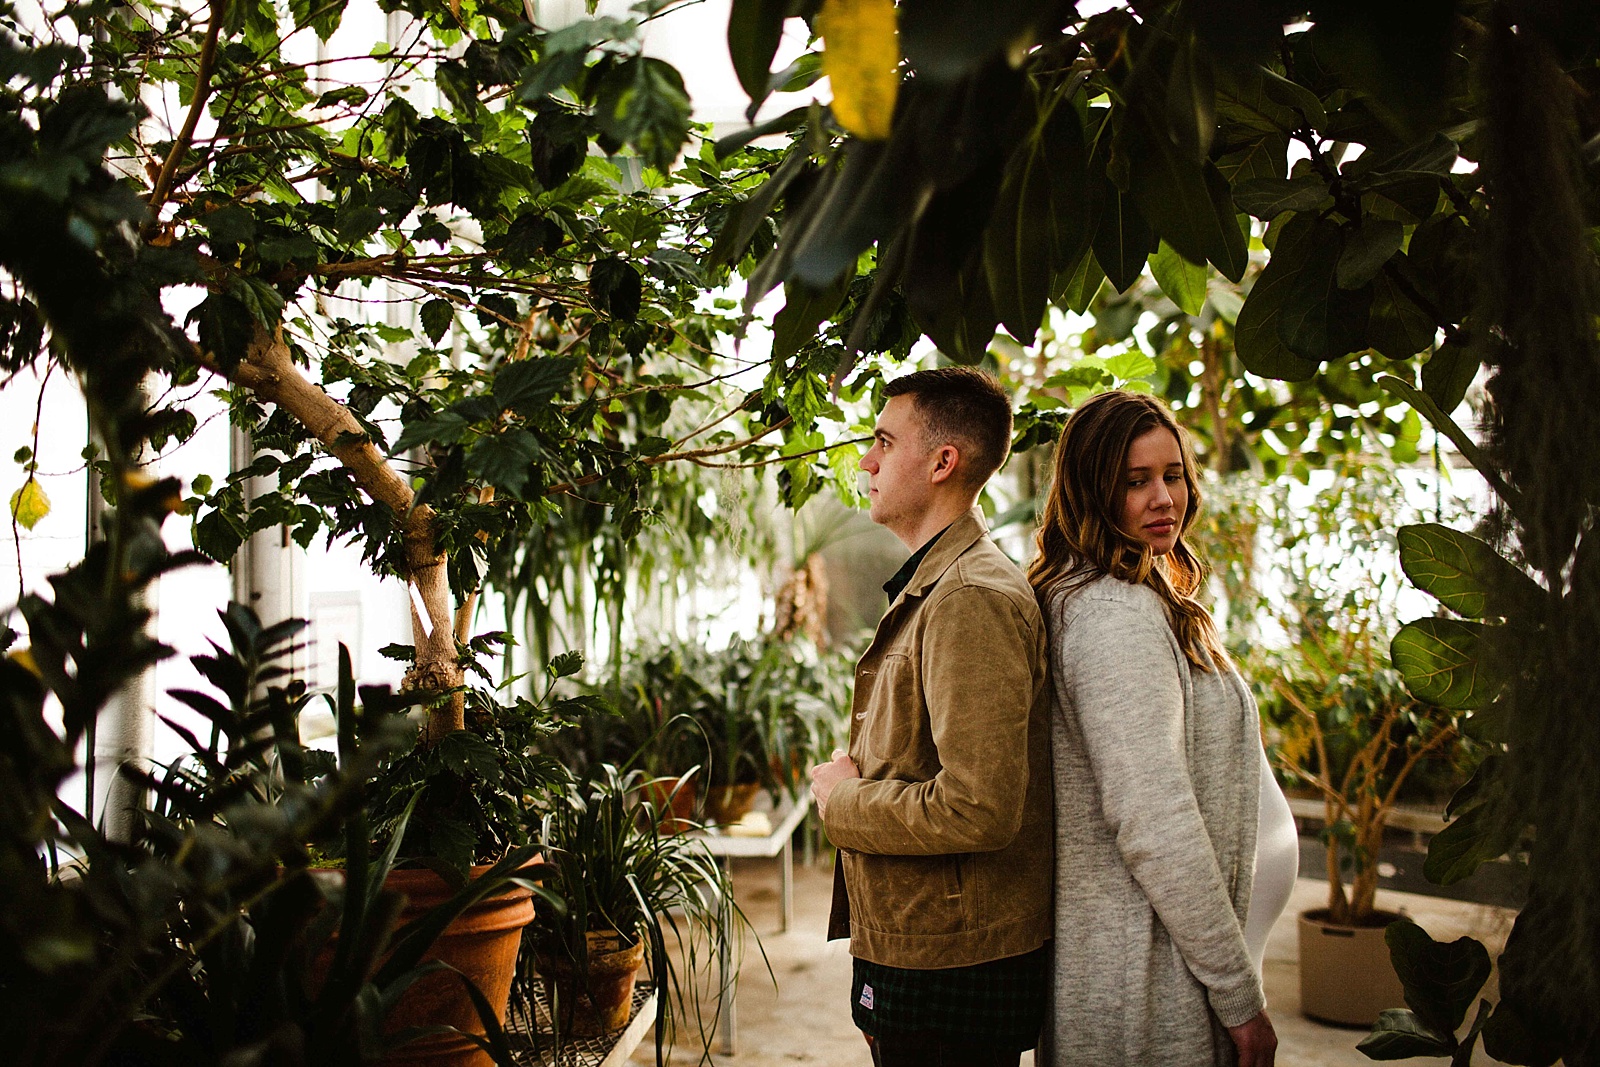 Anchorage Maternity Session at Mann Leiser Memorial Greenhouse